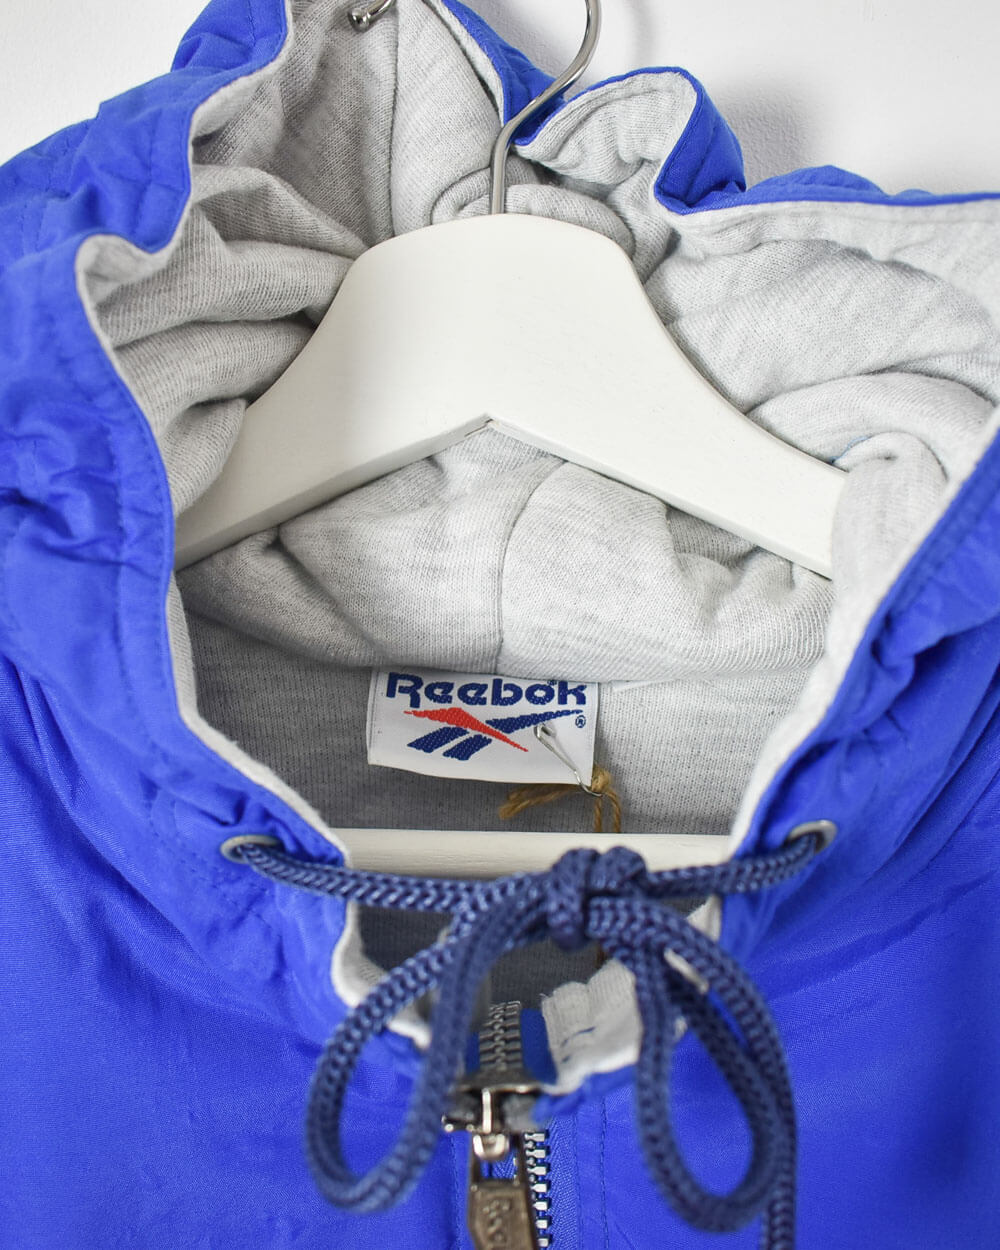 Reebok Hooded Winter Coat - X-Large - Domno Vintage 90s, 80s, 00s Retro and Vintage Clothing 